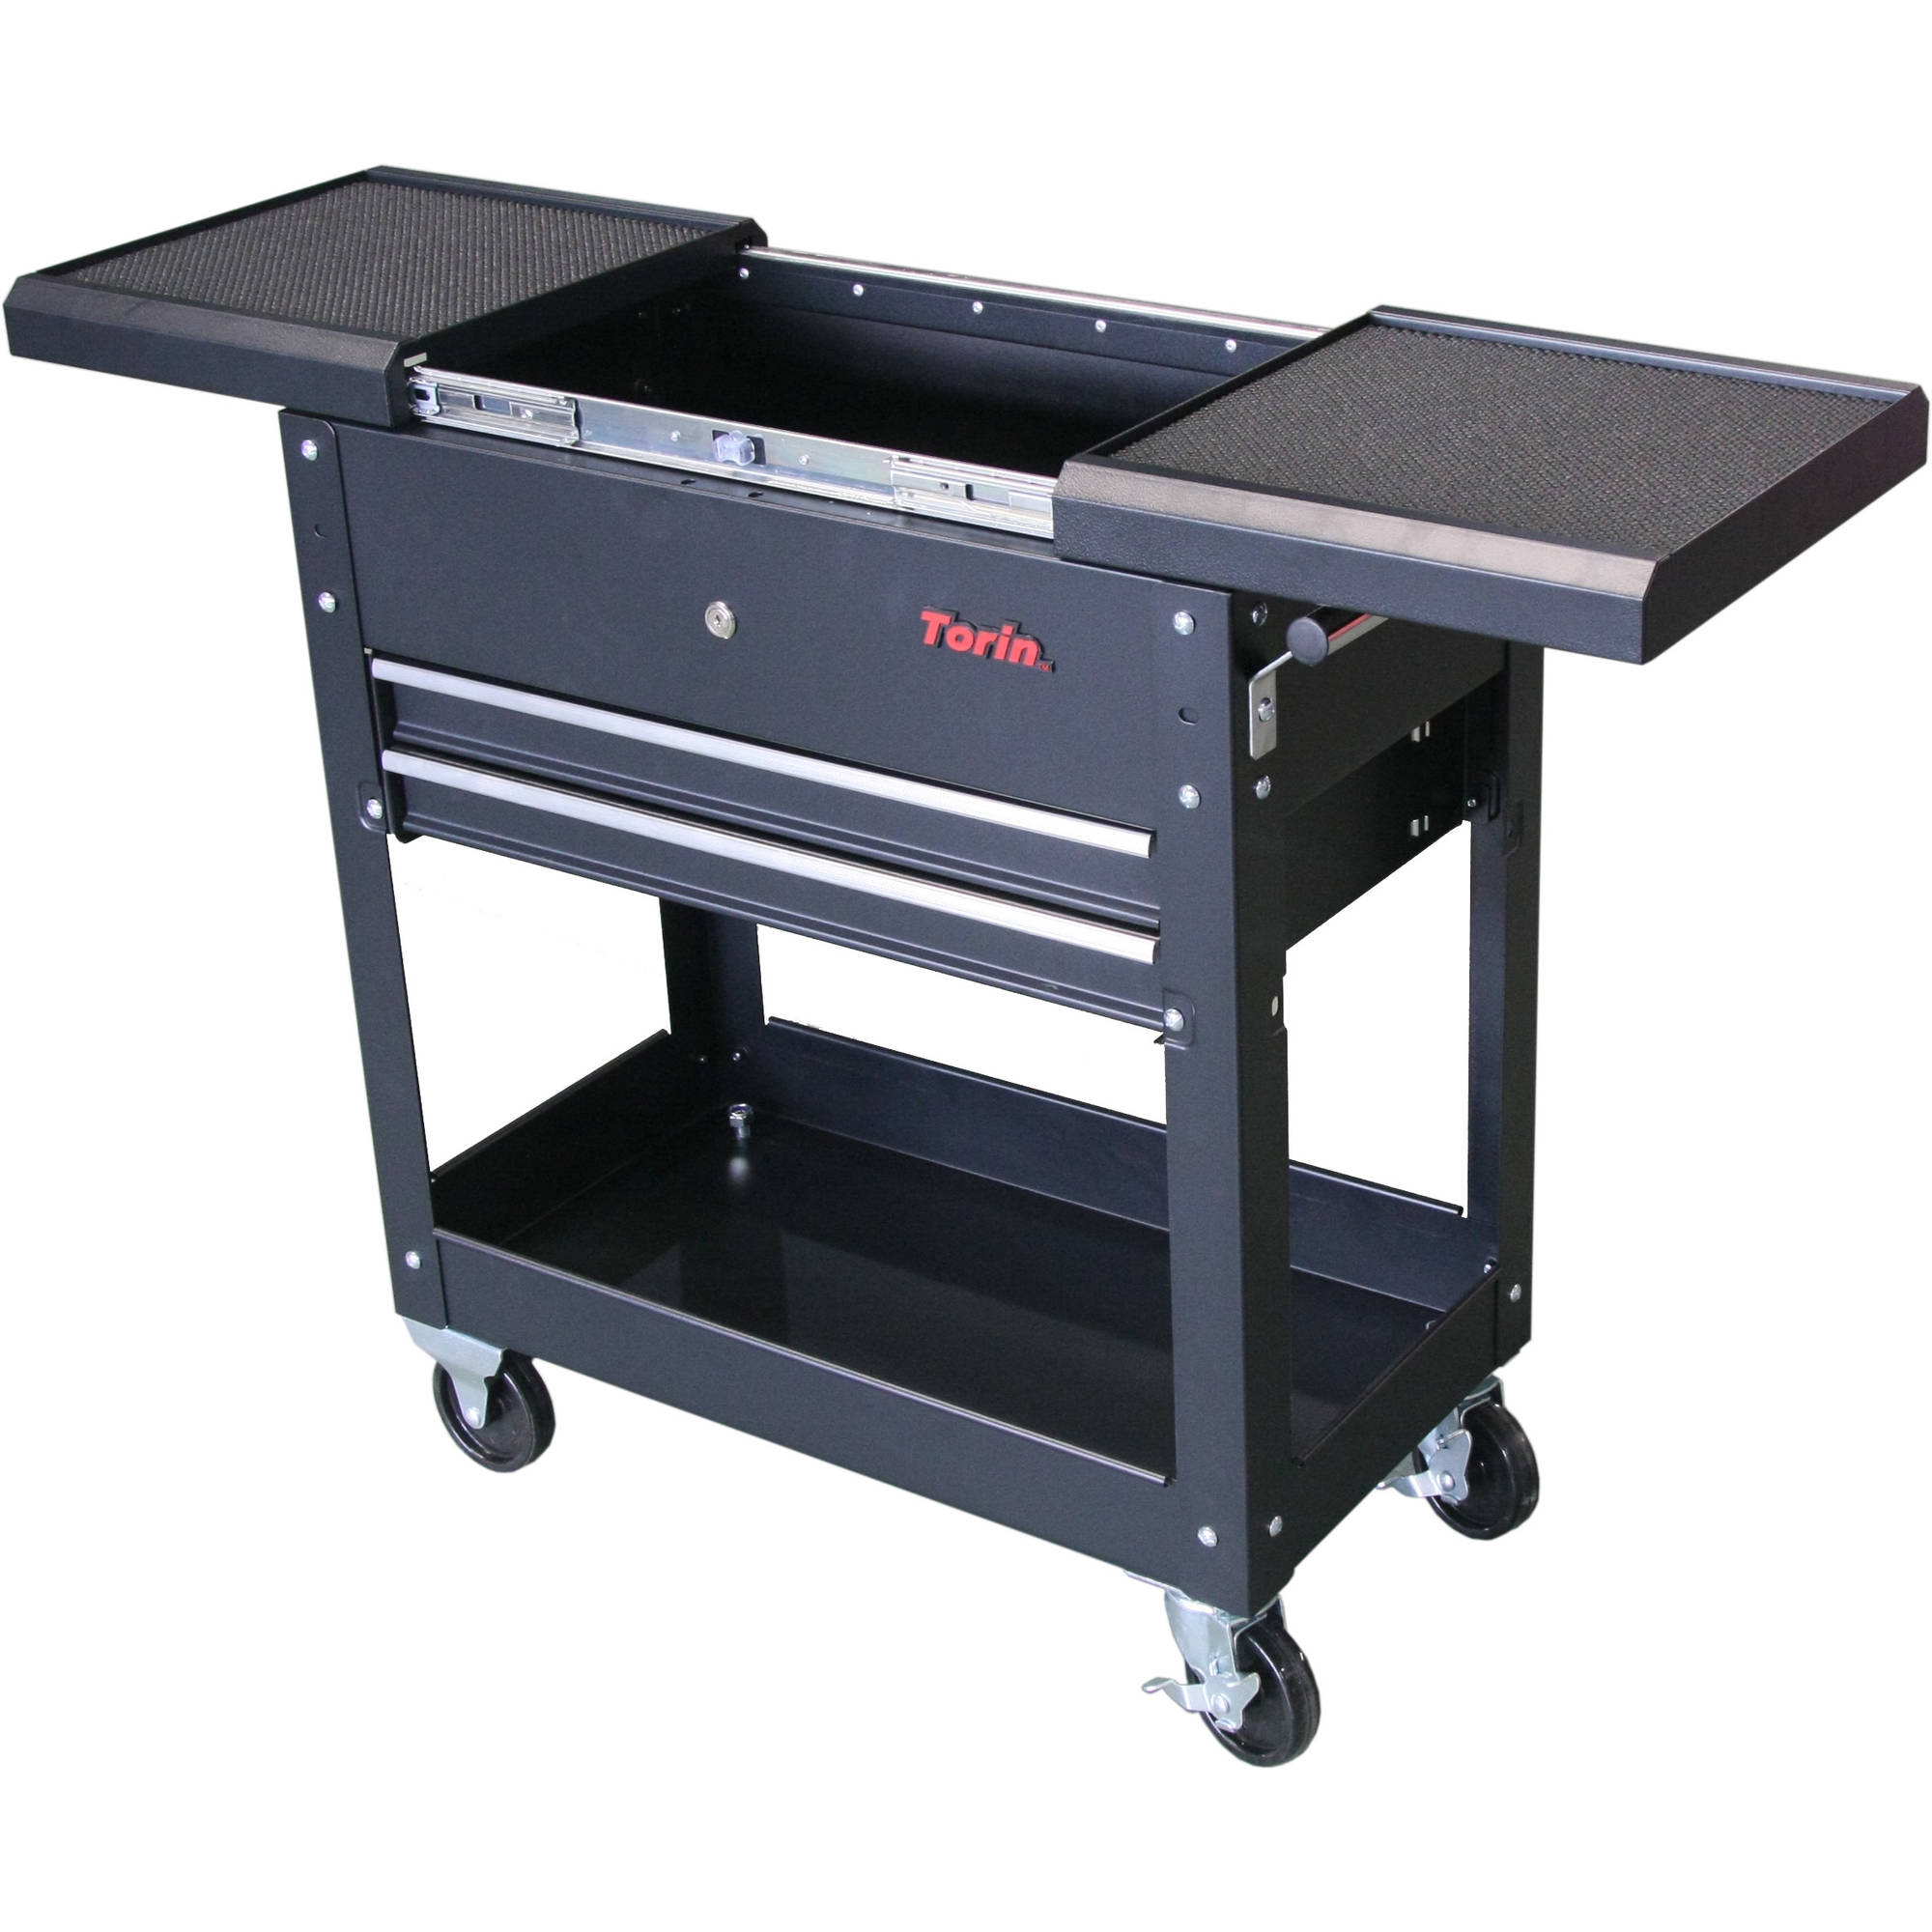 Torin Adjustable Table Tool Cart - image 1 of 1